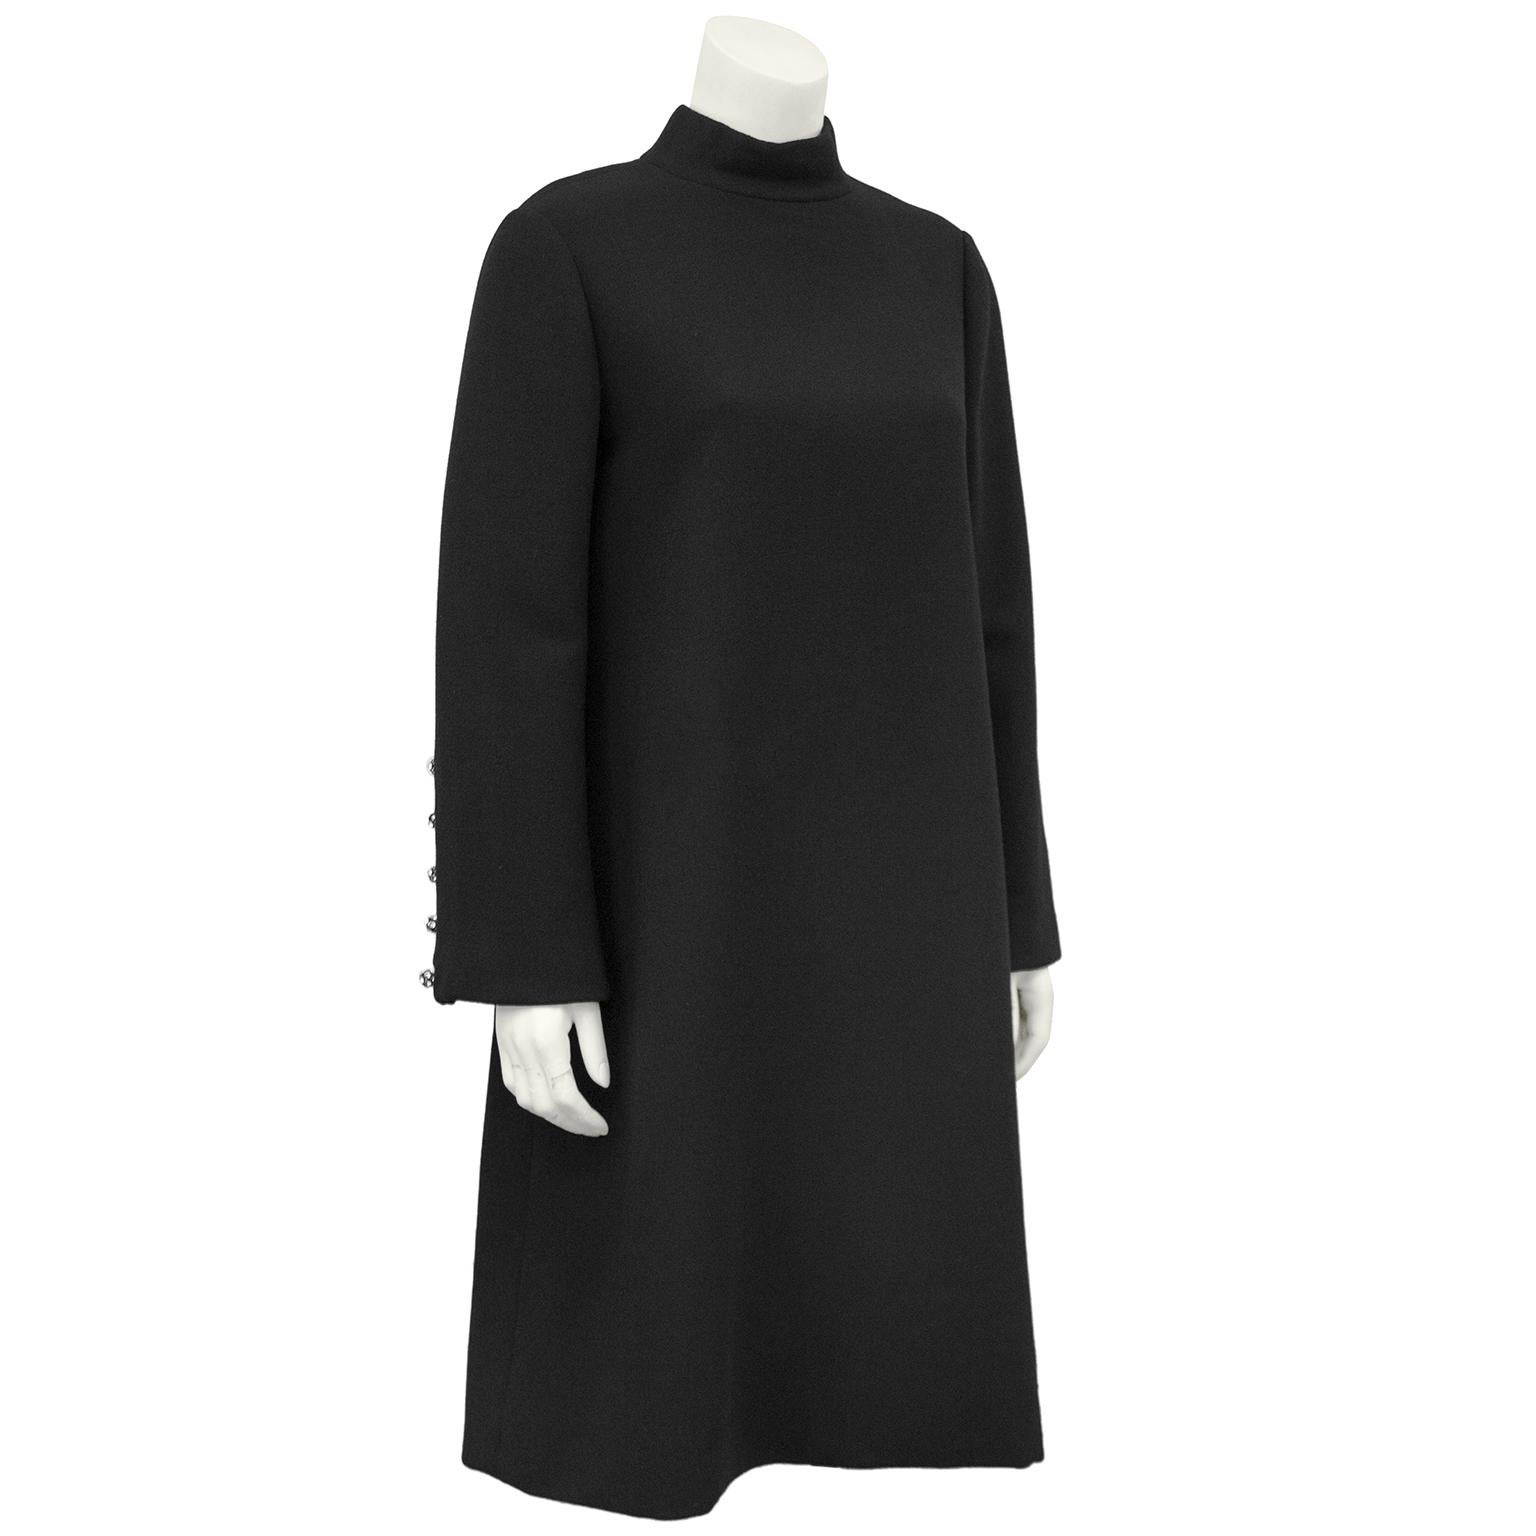 Beene at his very best, this 1960s black wool cocktail dress is the epitome of understated chic. The bell sleeves are accented with round rhinestone buttons and the A line swing style dress is cut perfectly. Zipper up the back with two hooks at the